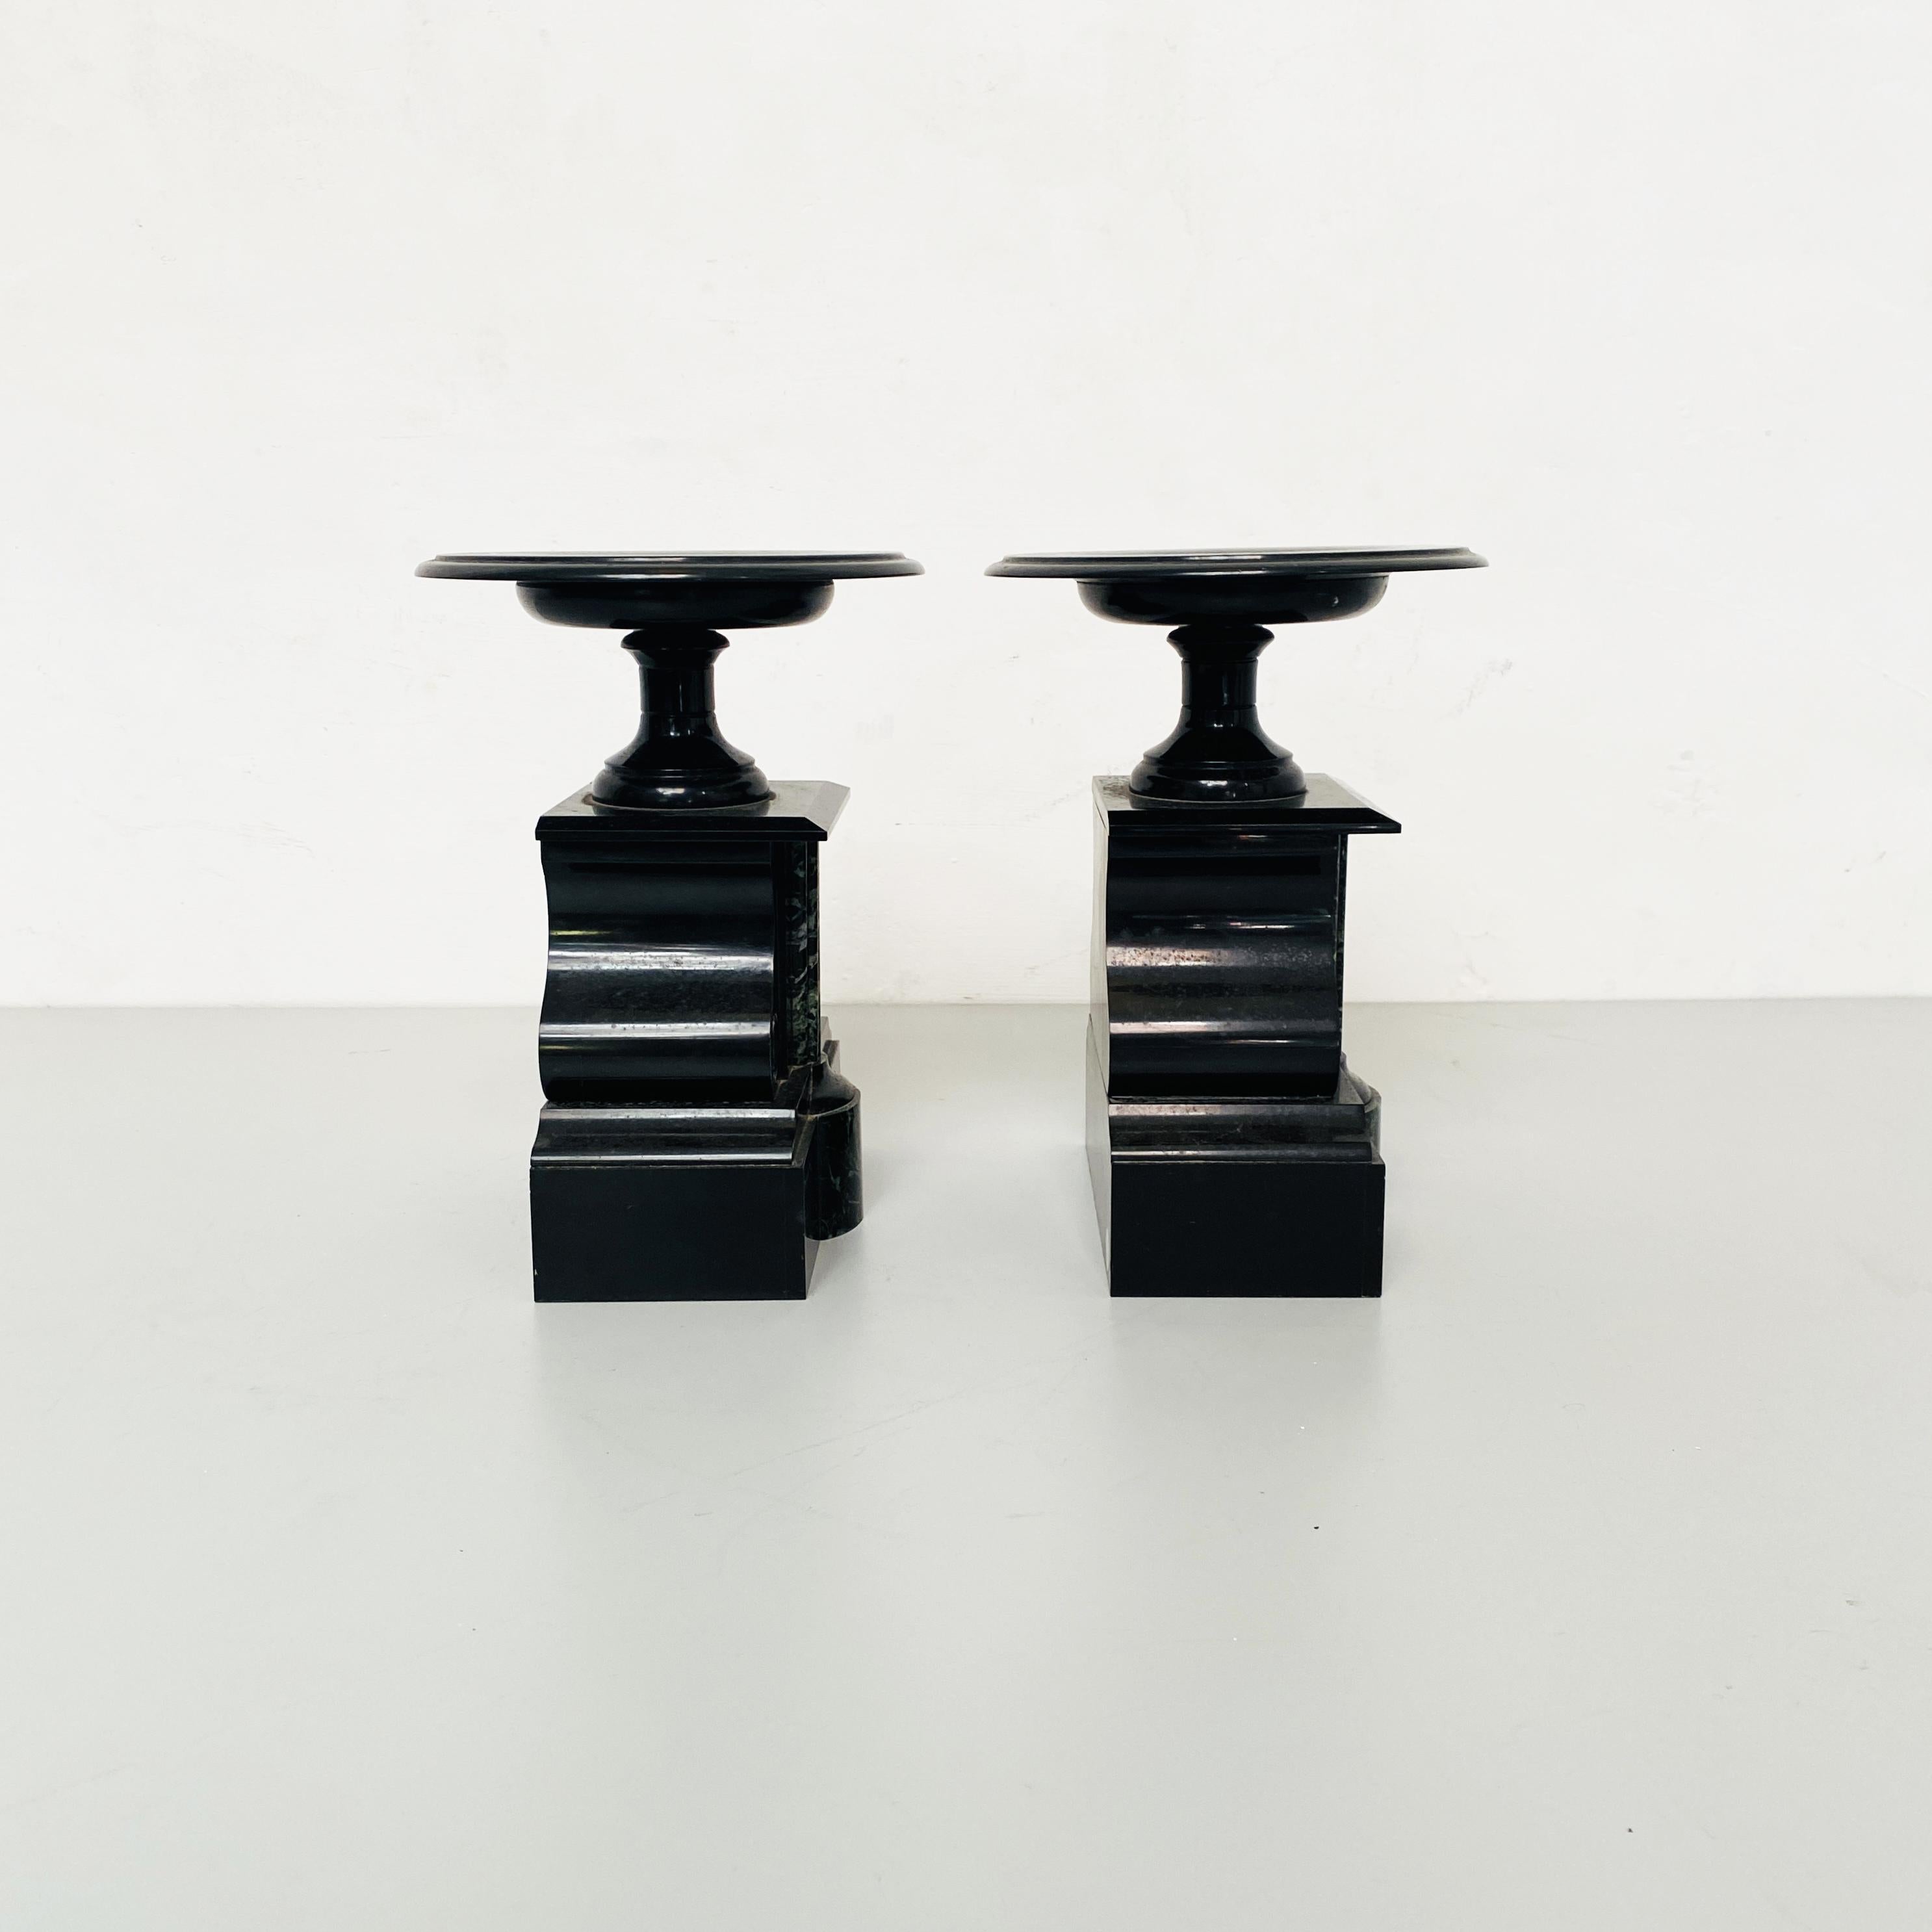 Italian Art Deco Black Onyx Centerpieces with Shape of a Balance, 1940s In Good Condition For Sale In MIlano, IT